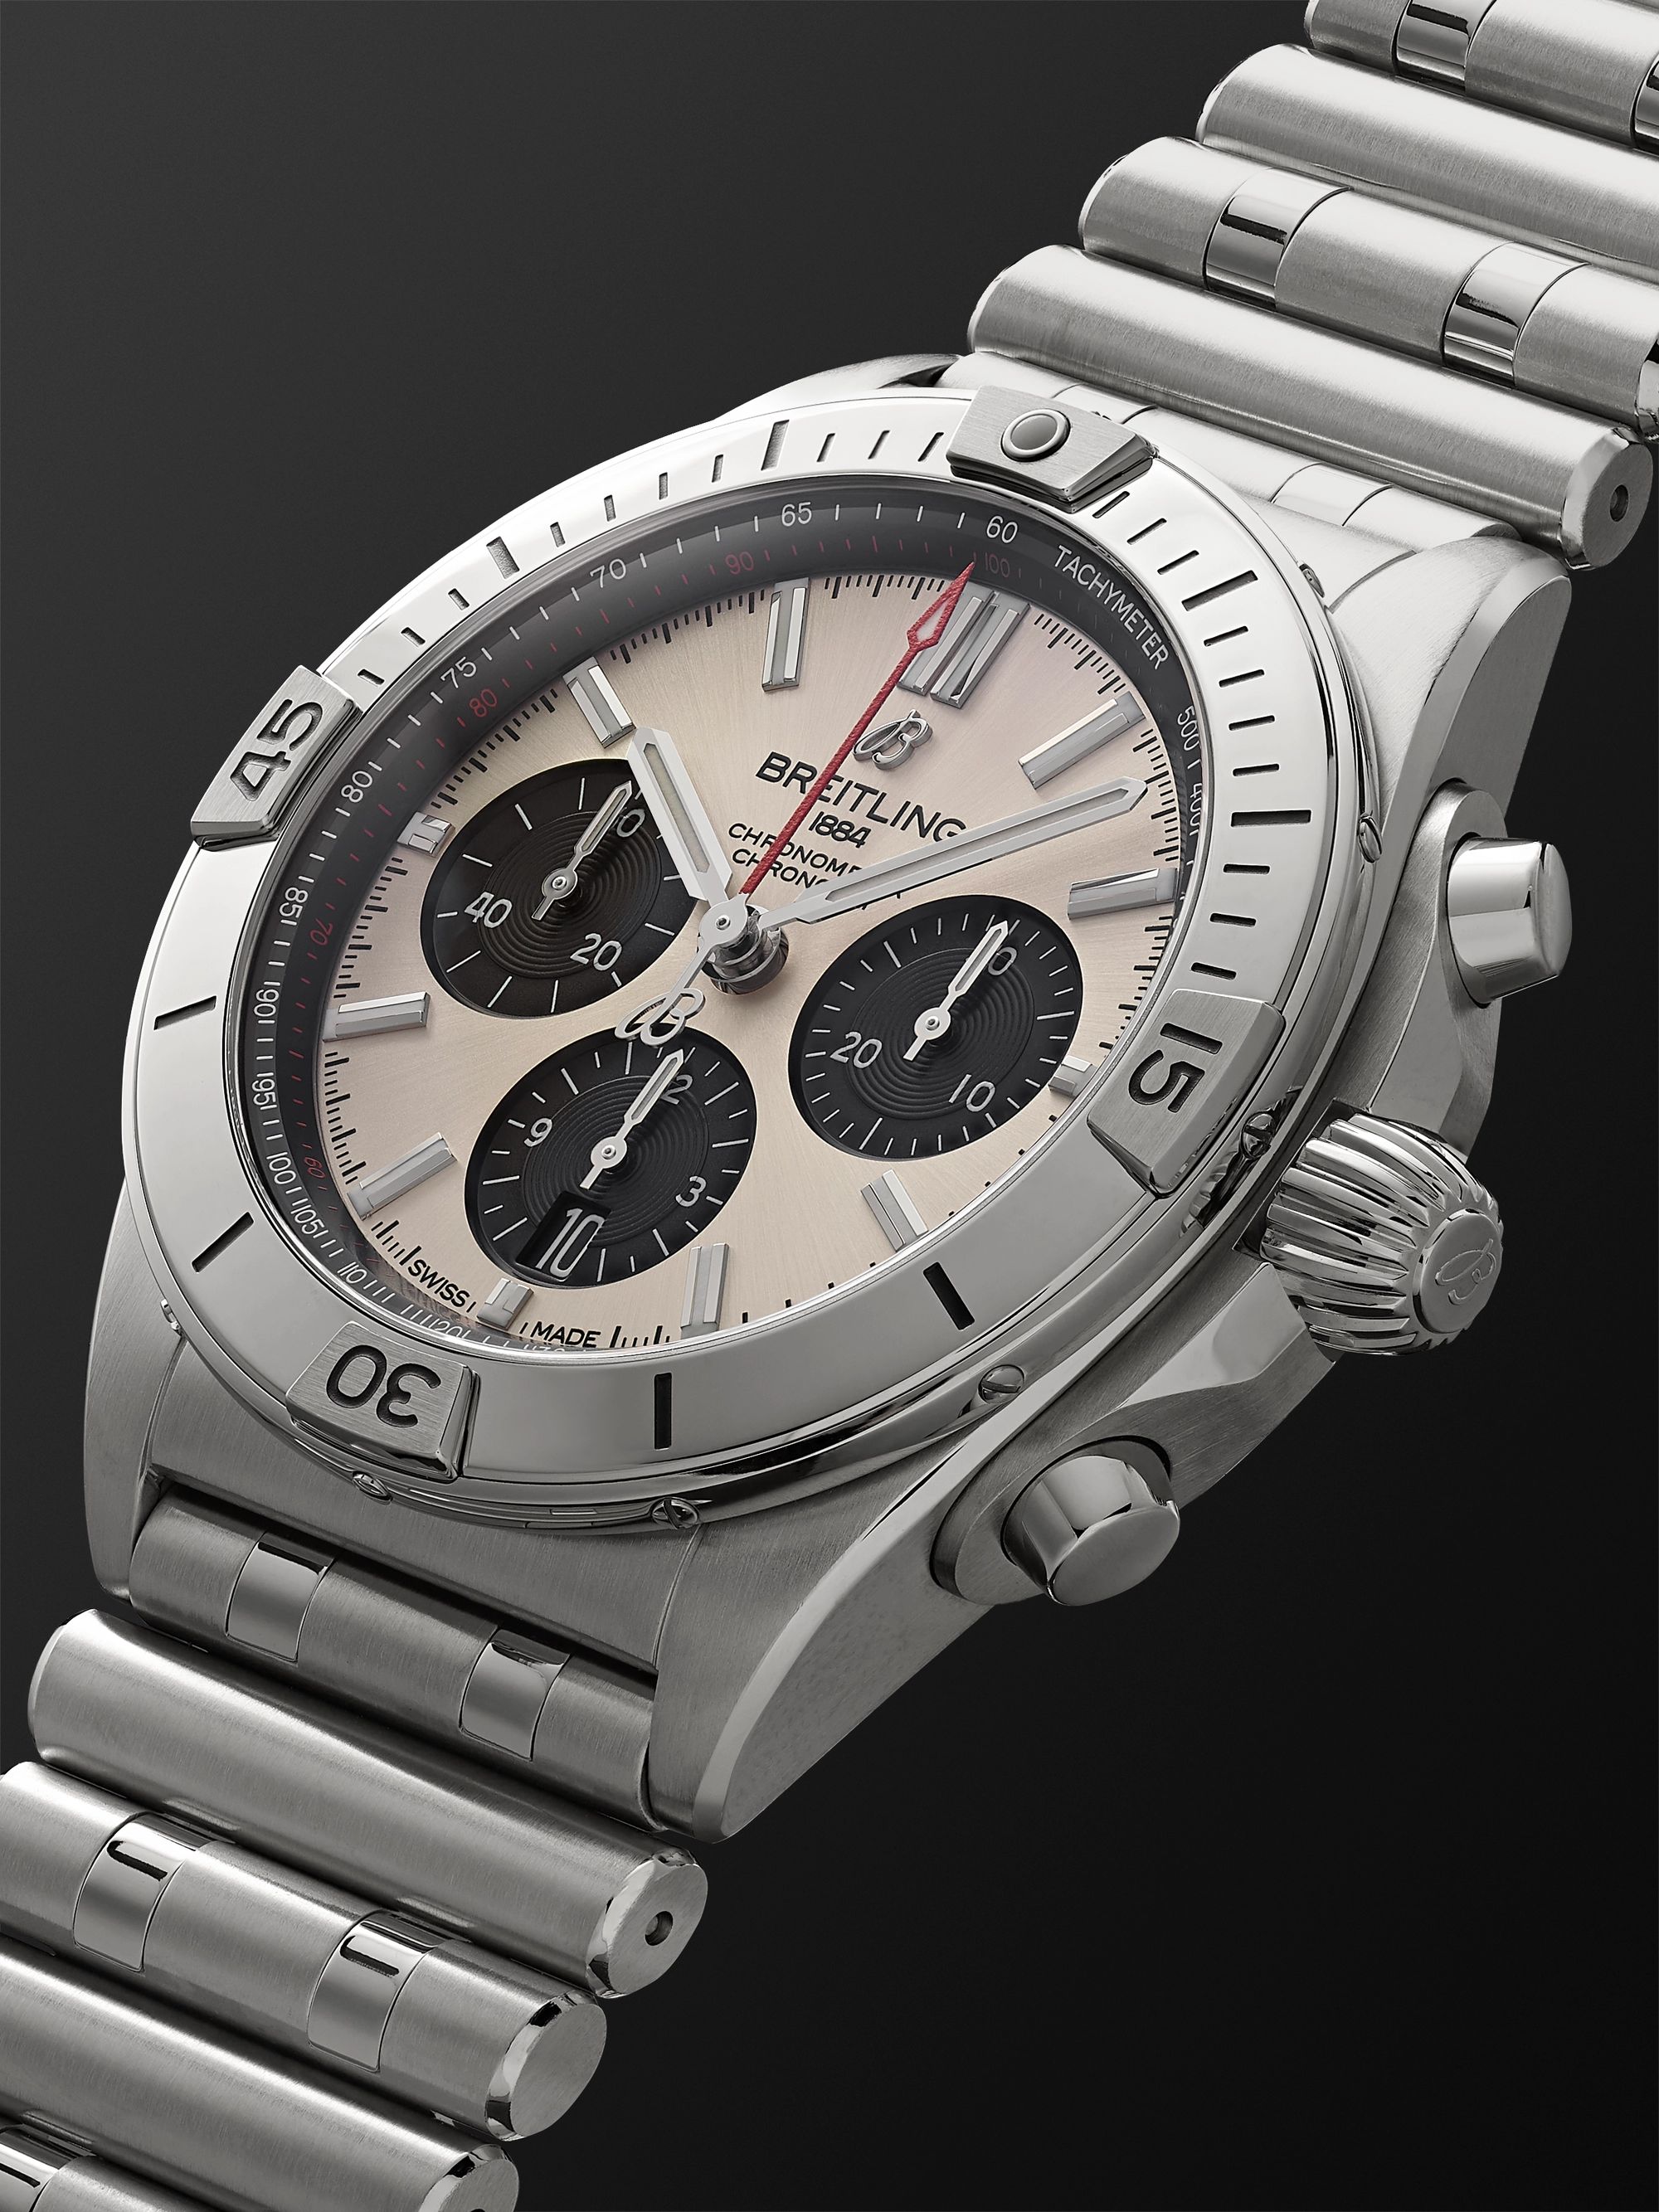 BREITLING Chronomat B01 Automatic Chronograph 42mm Stainless Steel Watch, Ref. No. AB0134101G1A1